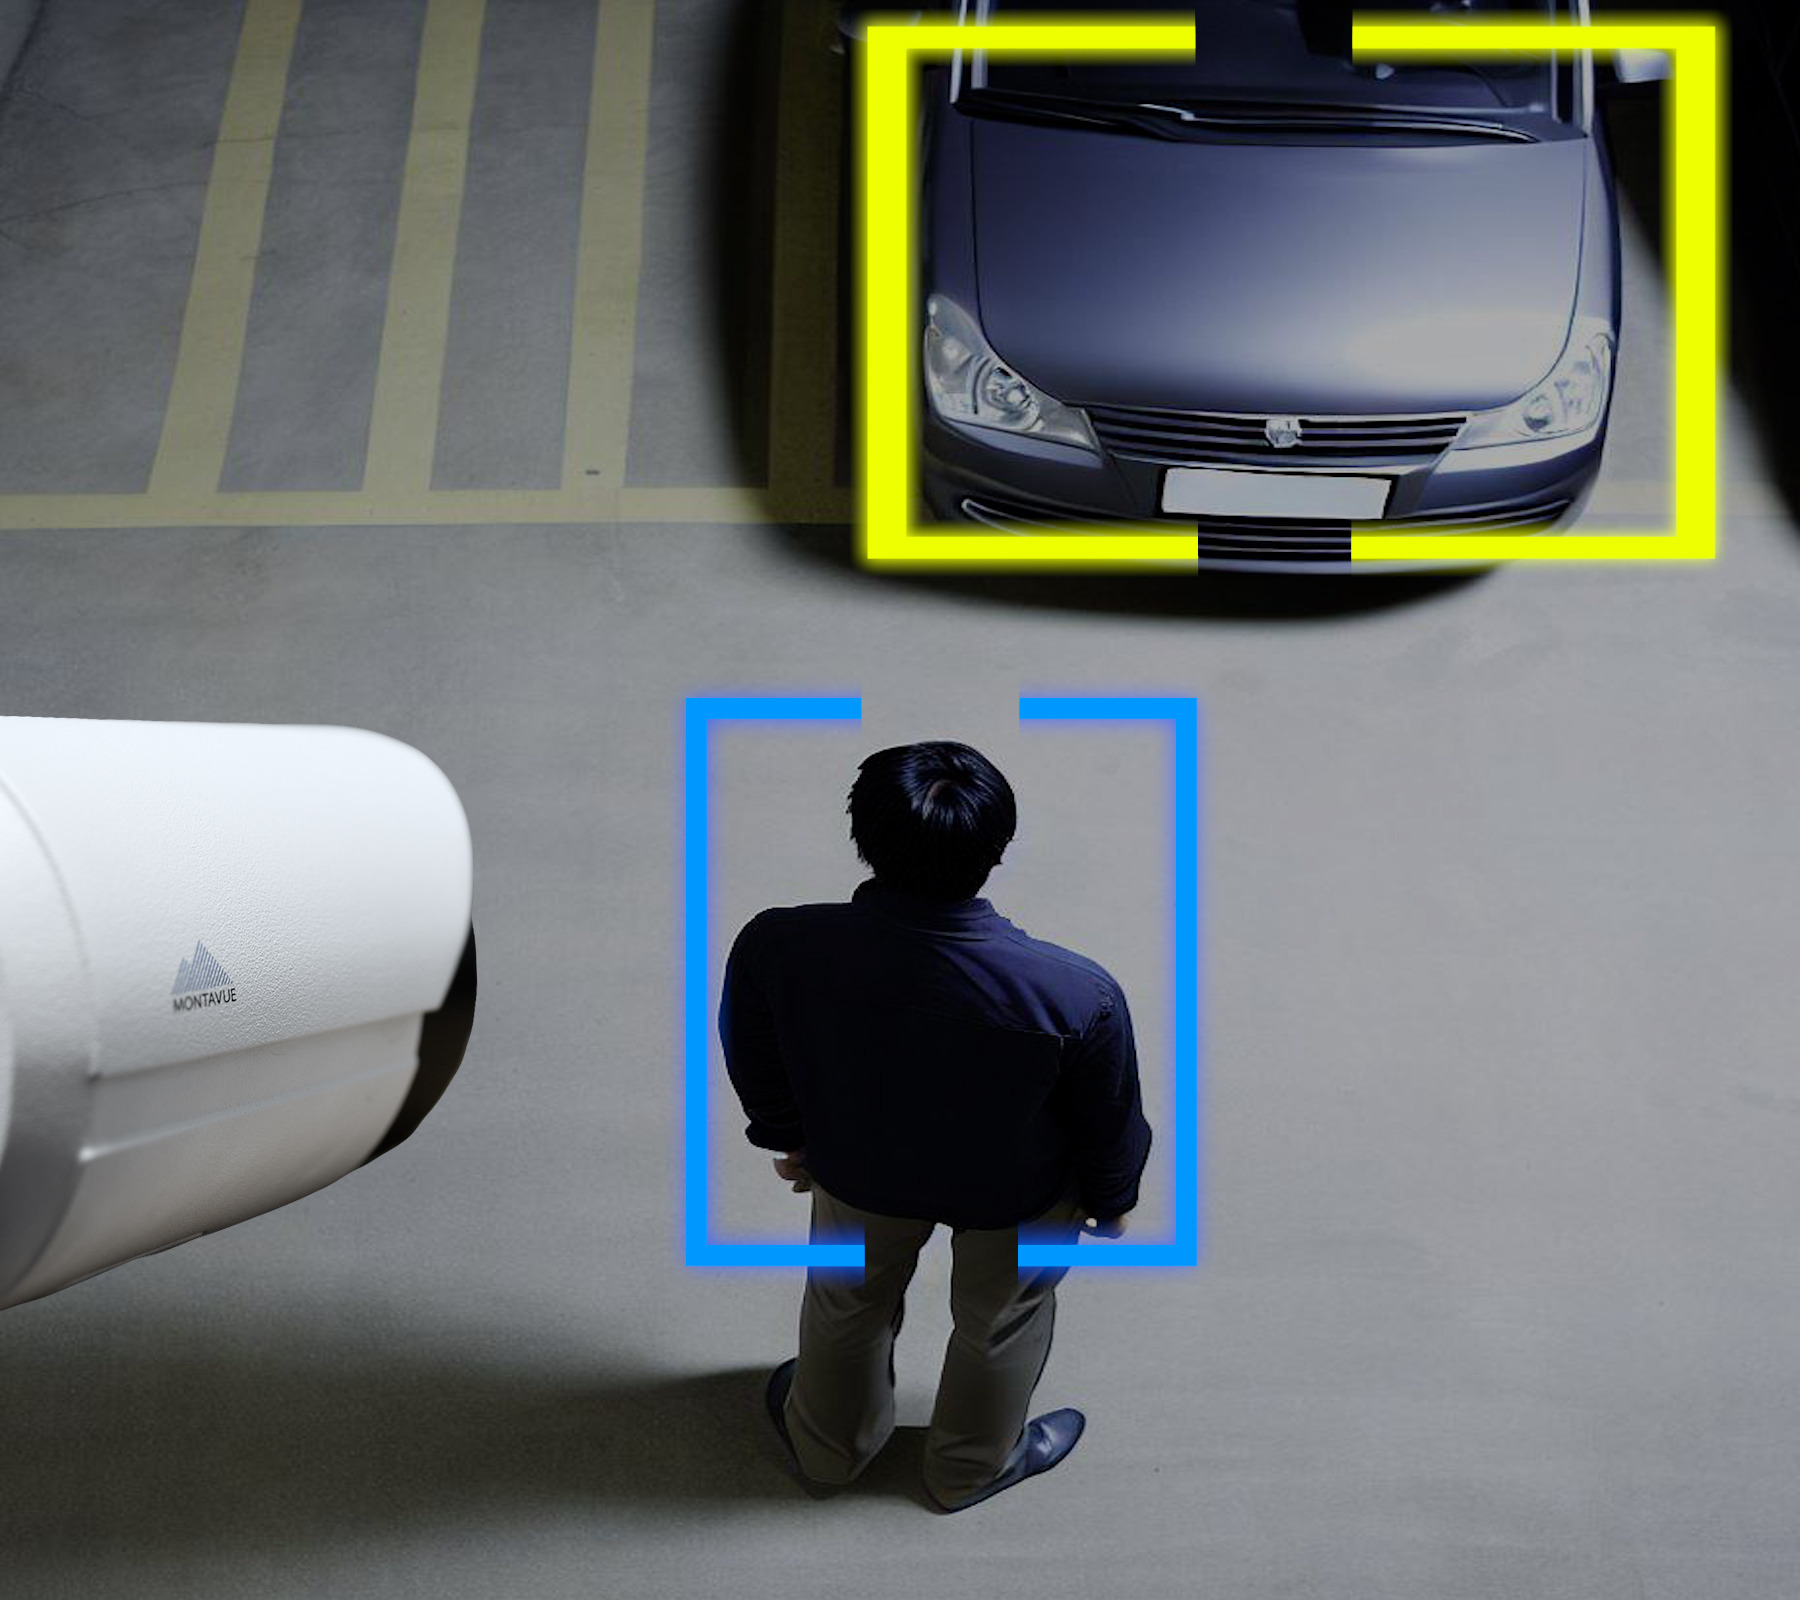 Smart Motion Detection with human/vehicle filter